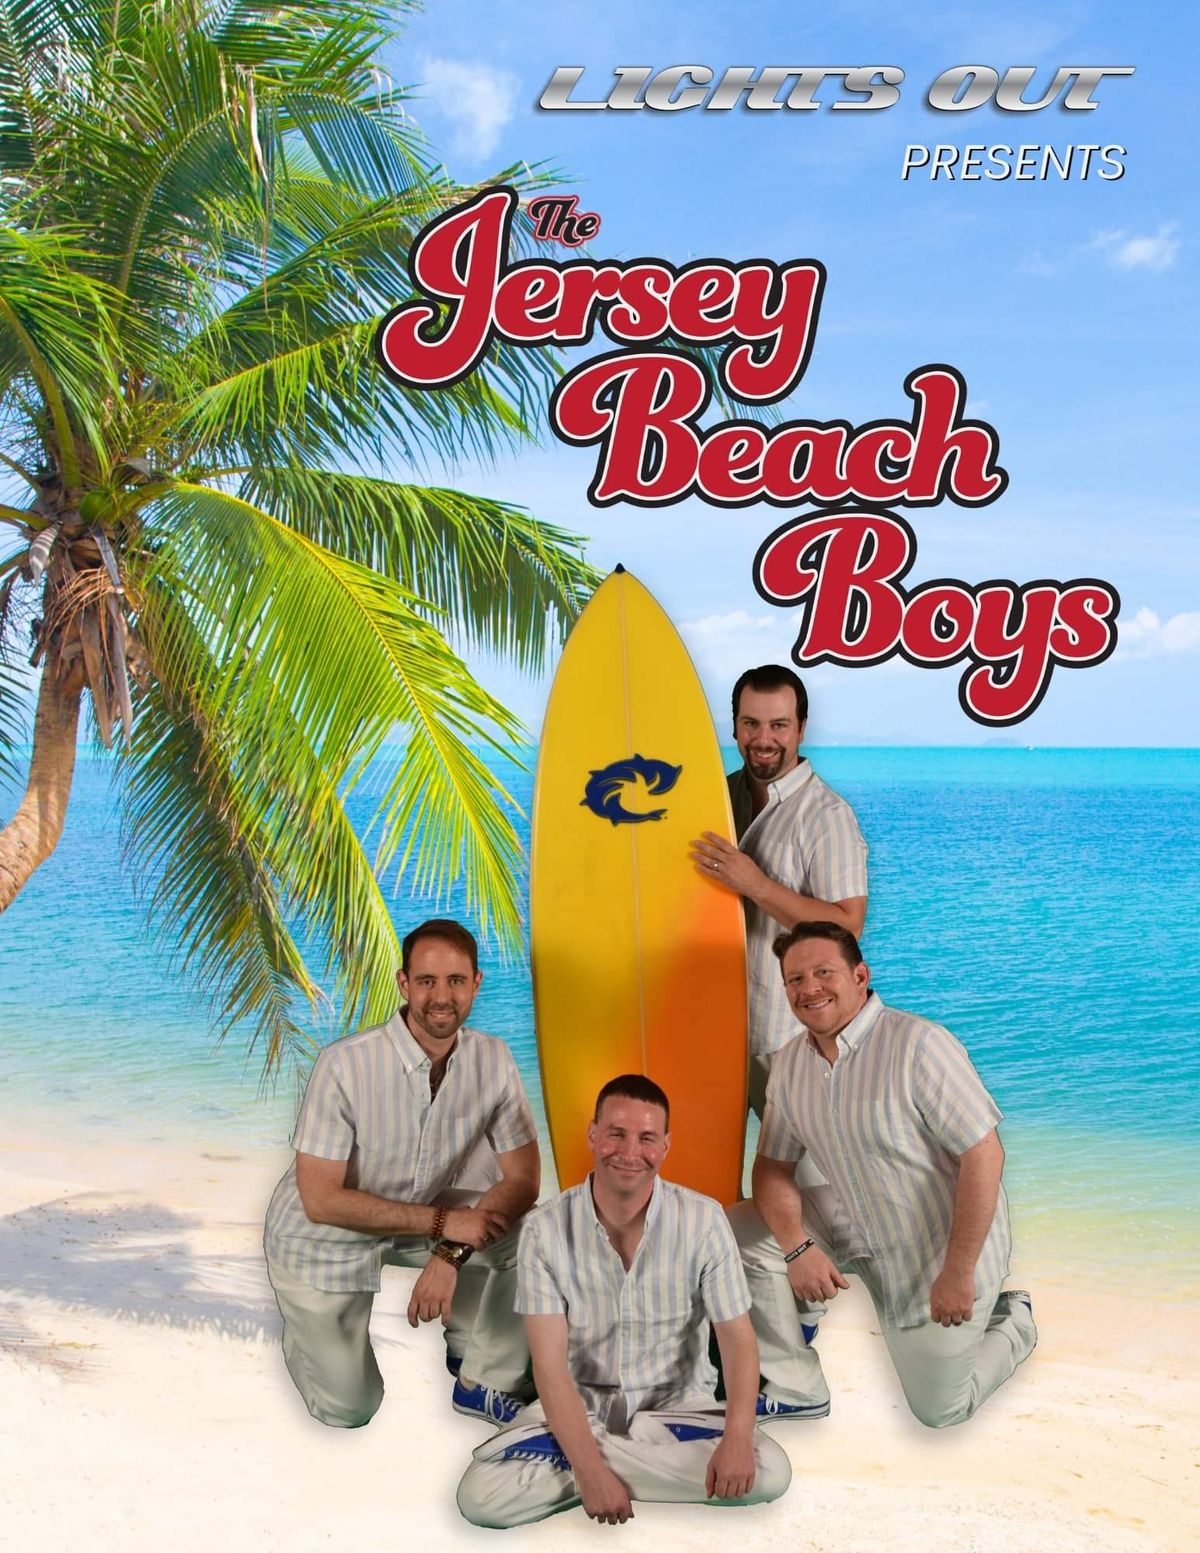 Lights Out Presents - The Jersey Beach Boys